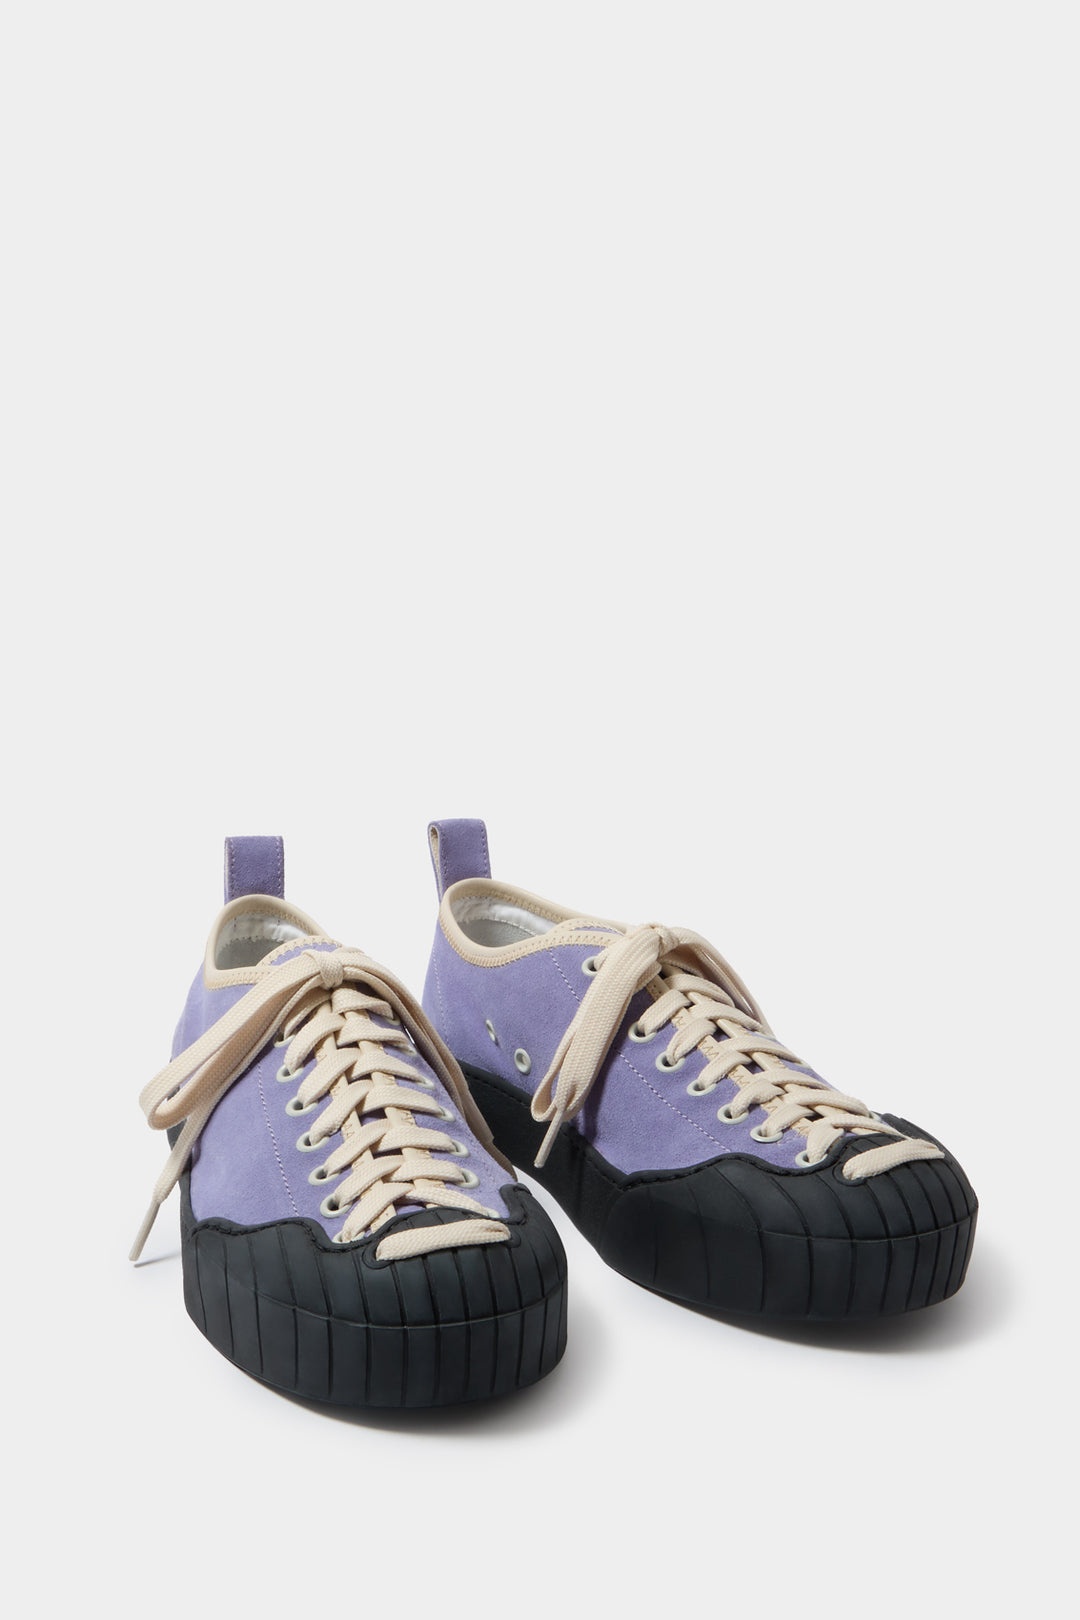 ISI LOW SHOES / periwinkle blue - 2